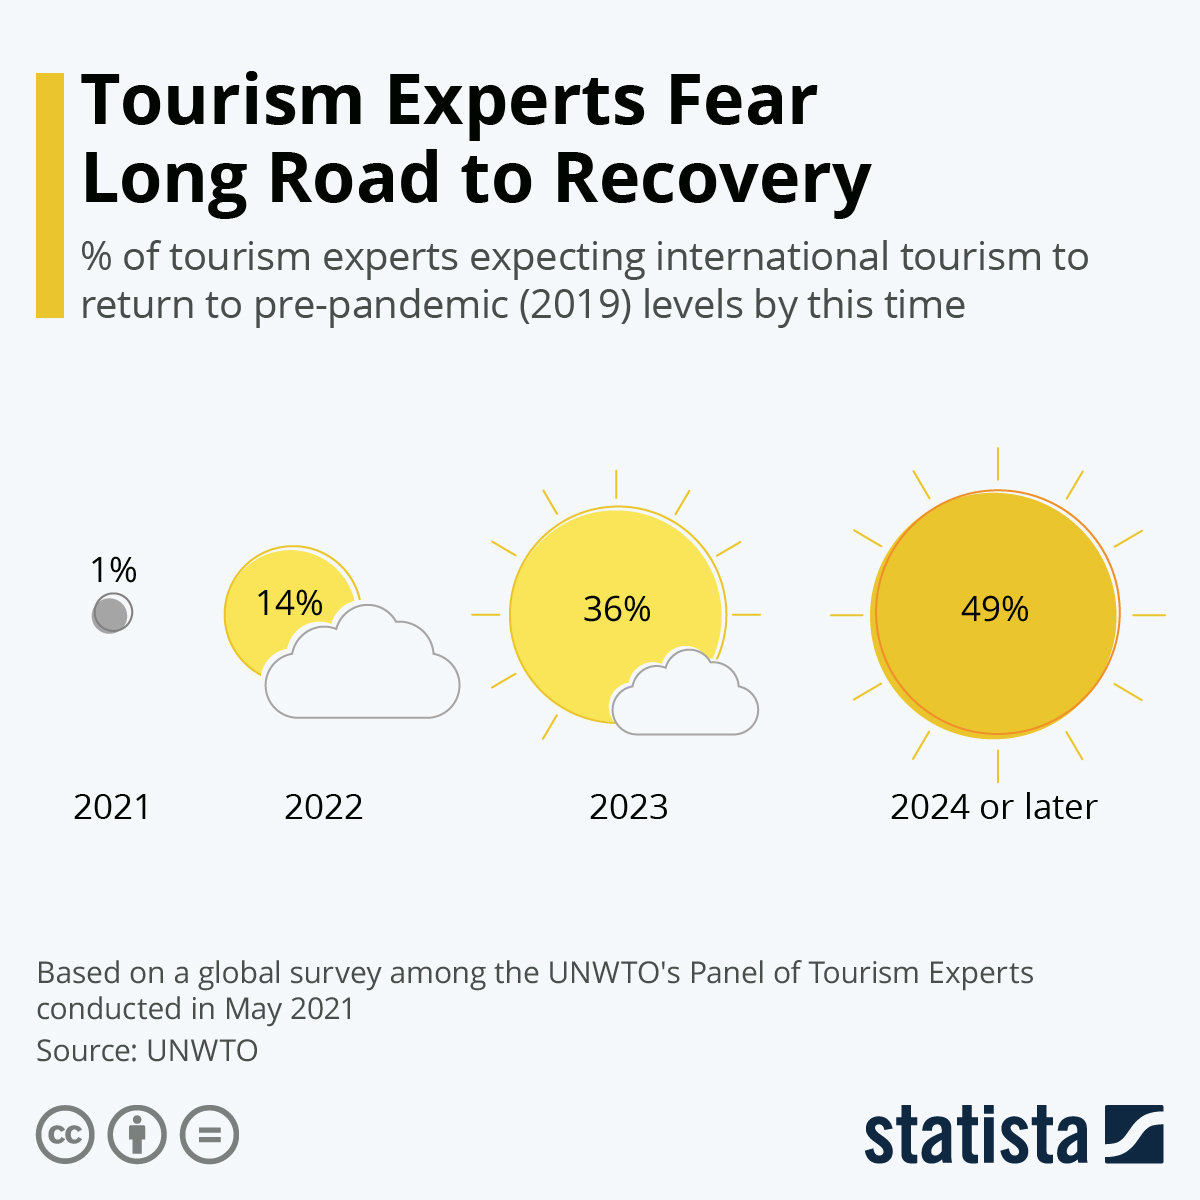 challenges of tourism industry during covid 19